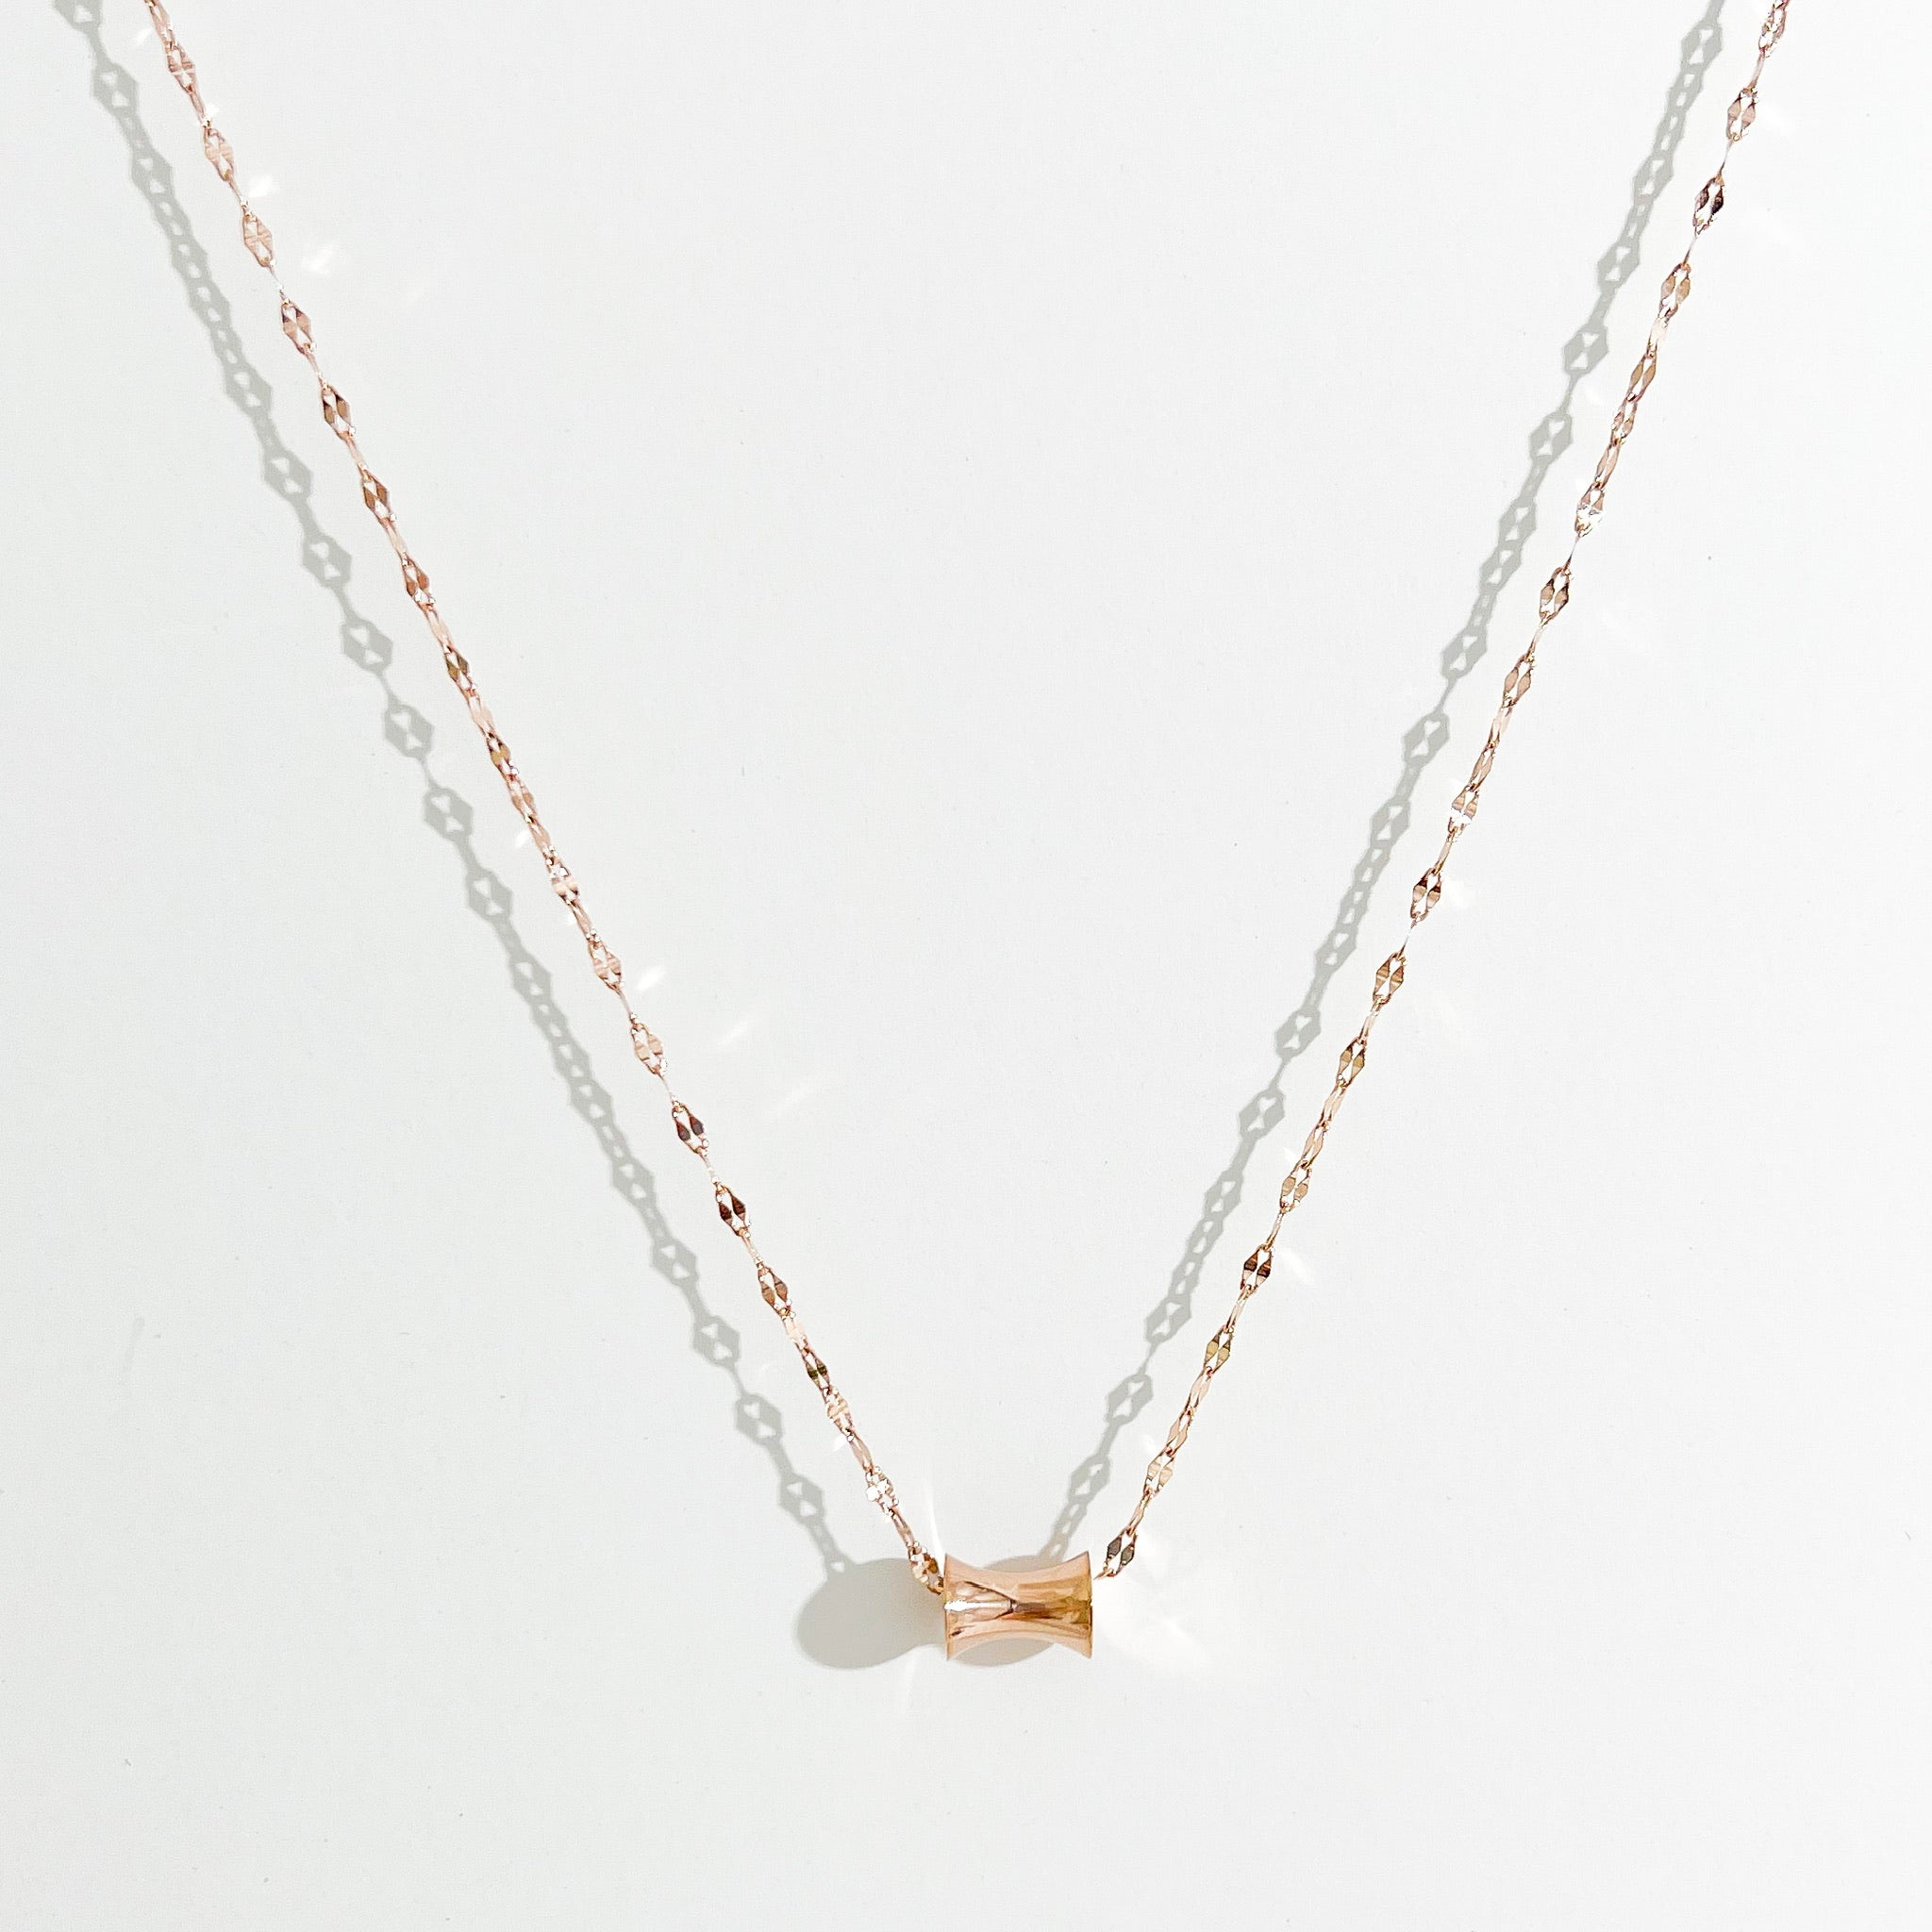 Katherine Necklace in Gold/Silver/Rose Gold - Flaire & Co.